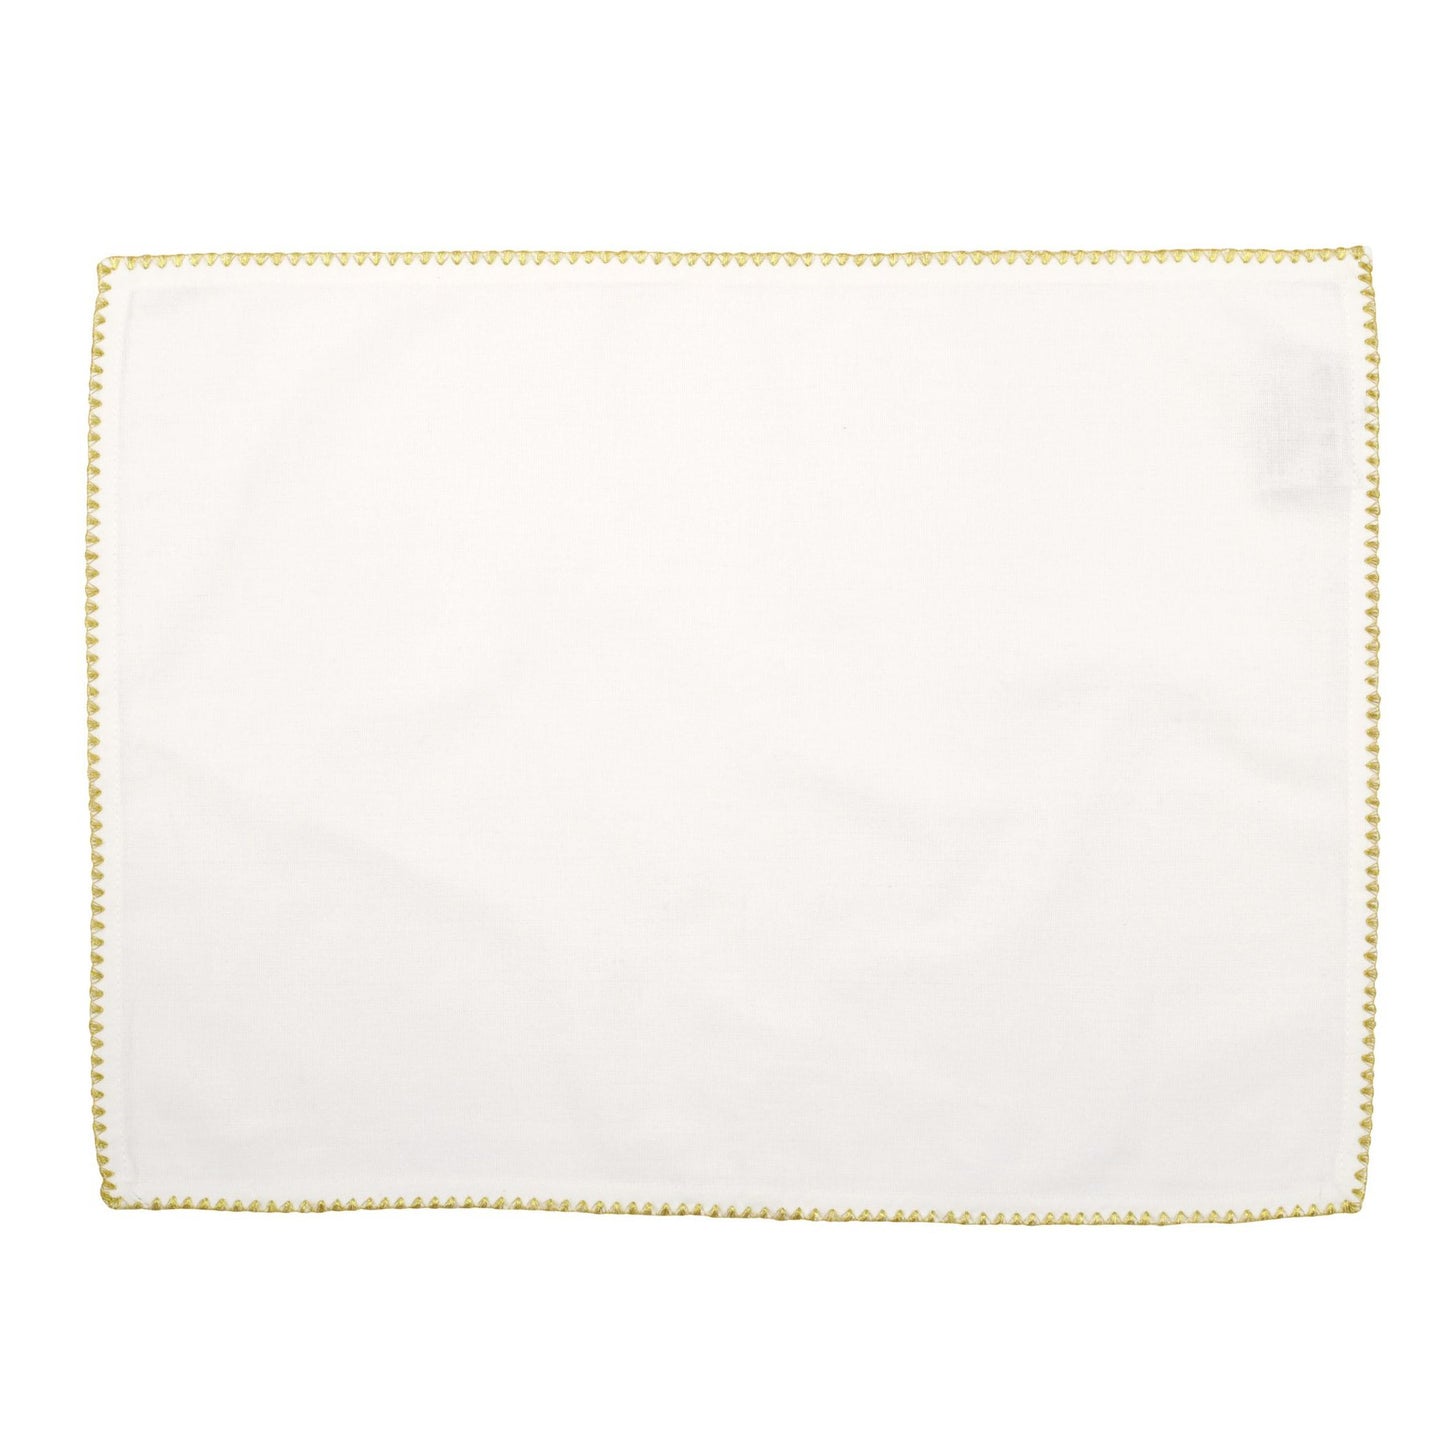 Vietri Cotone Linen Ivory Placemats with Gold Stitching, Set of 4